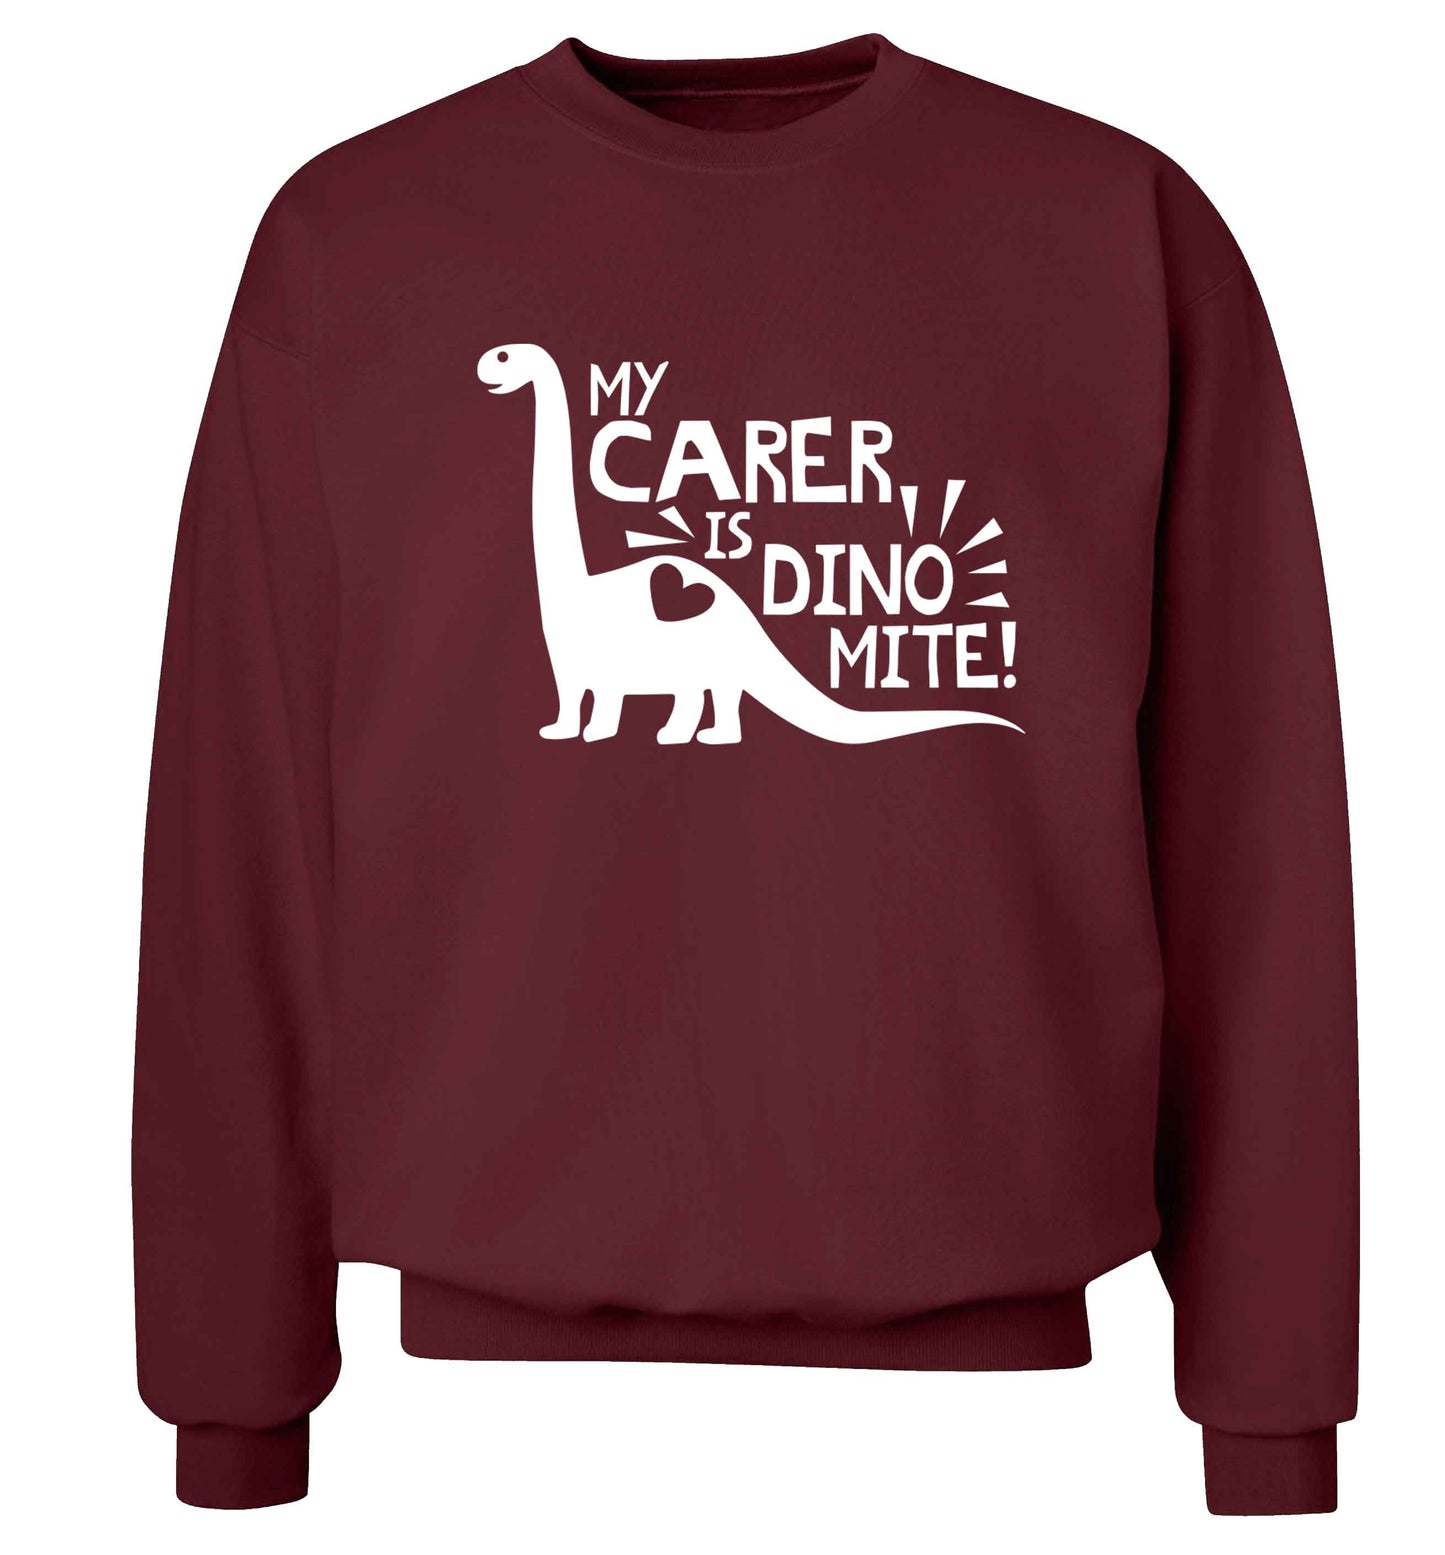 My carer is dinomite! Adult's unisex maroon Sweater 2XL